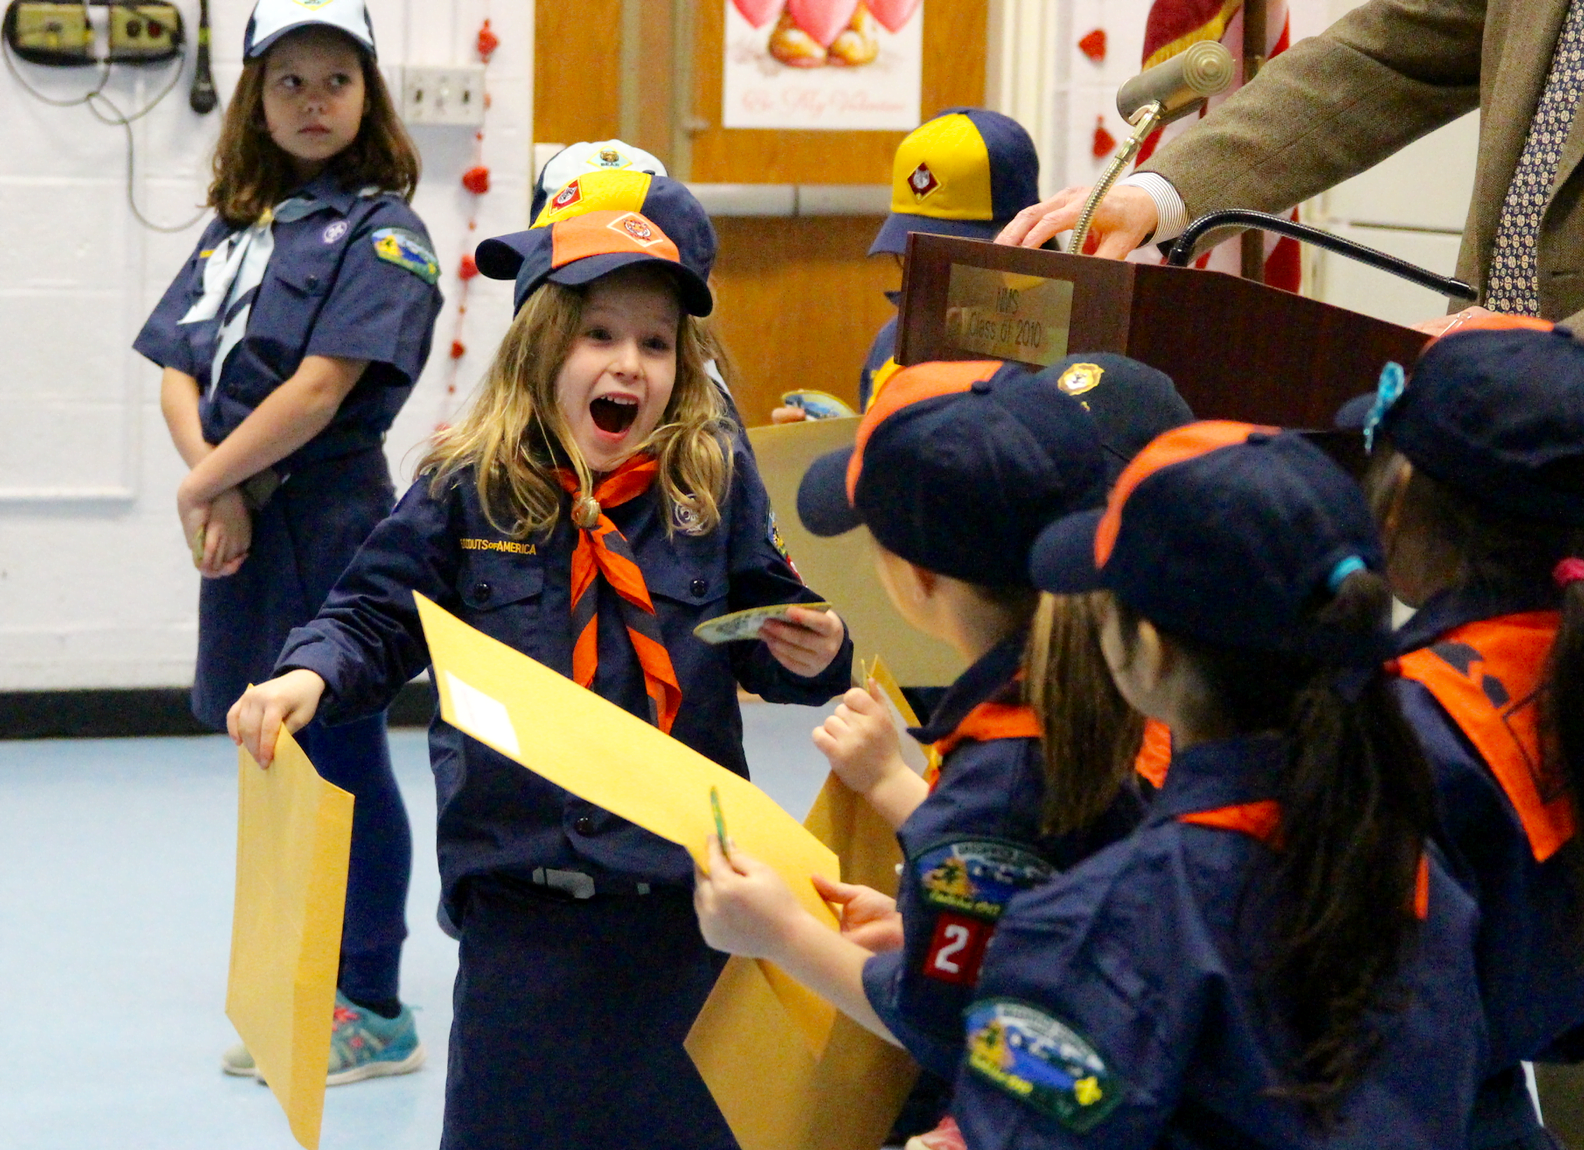 Charlotte DiPreta, age 6, along with 8 other girls was inducted into Pack 23 at North Mianus School on Thursday night.